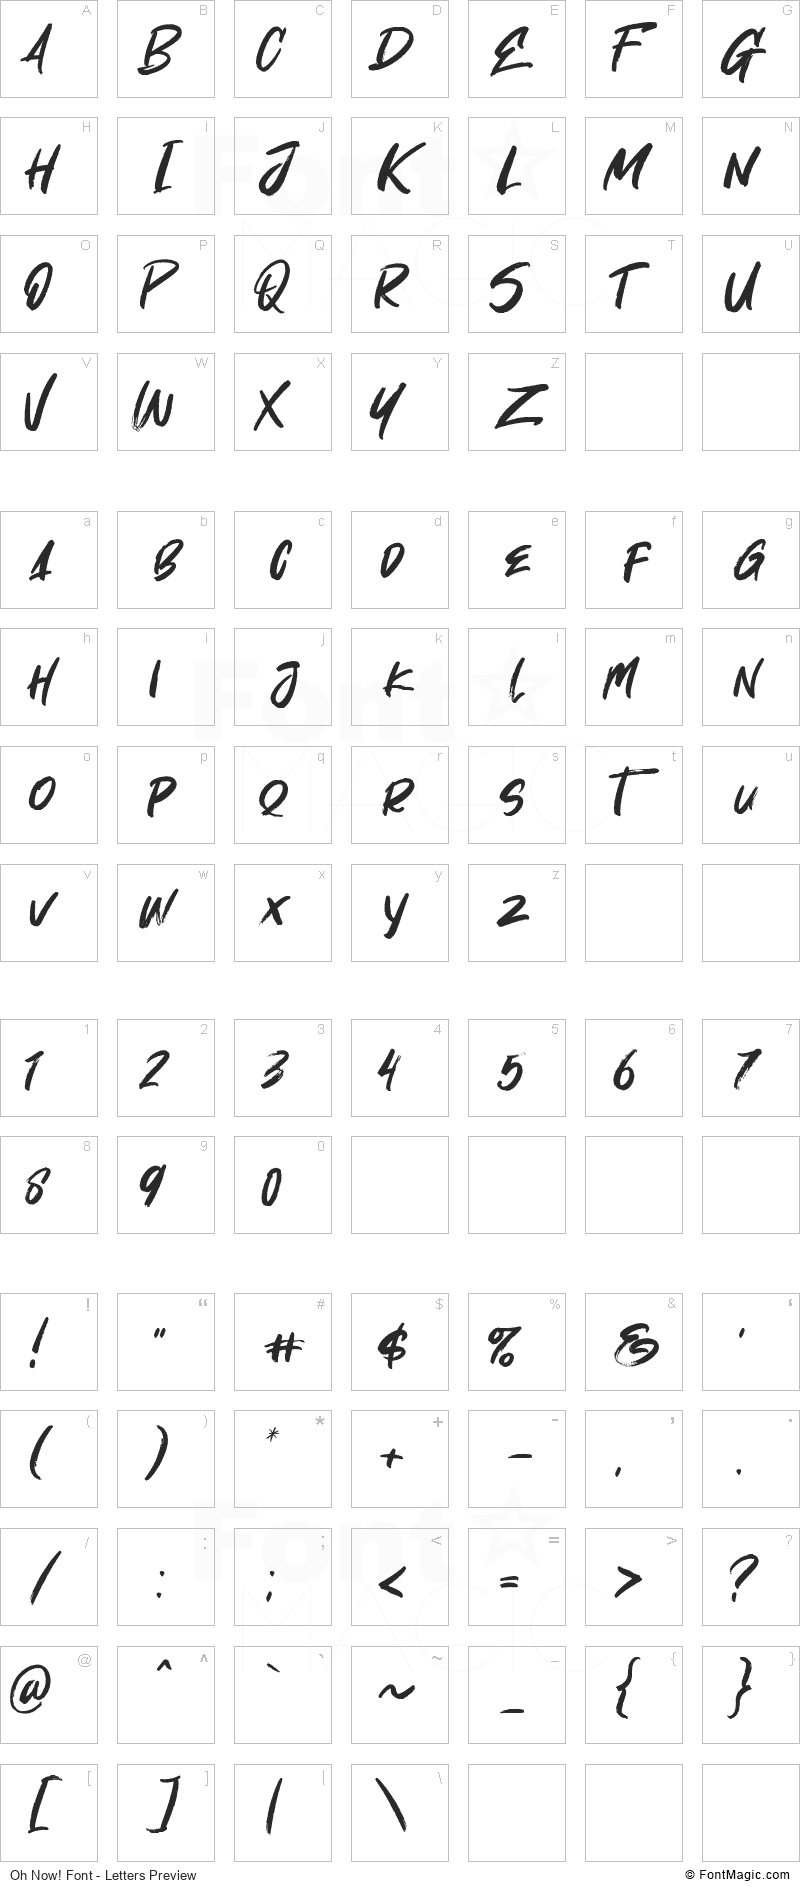 Oh Now! Font - All Latters Preview Chart